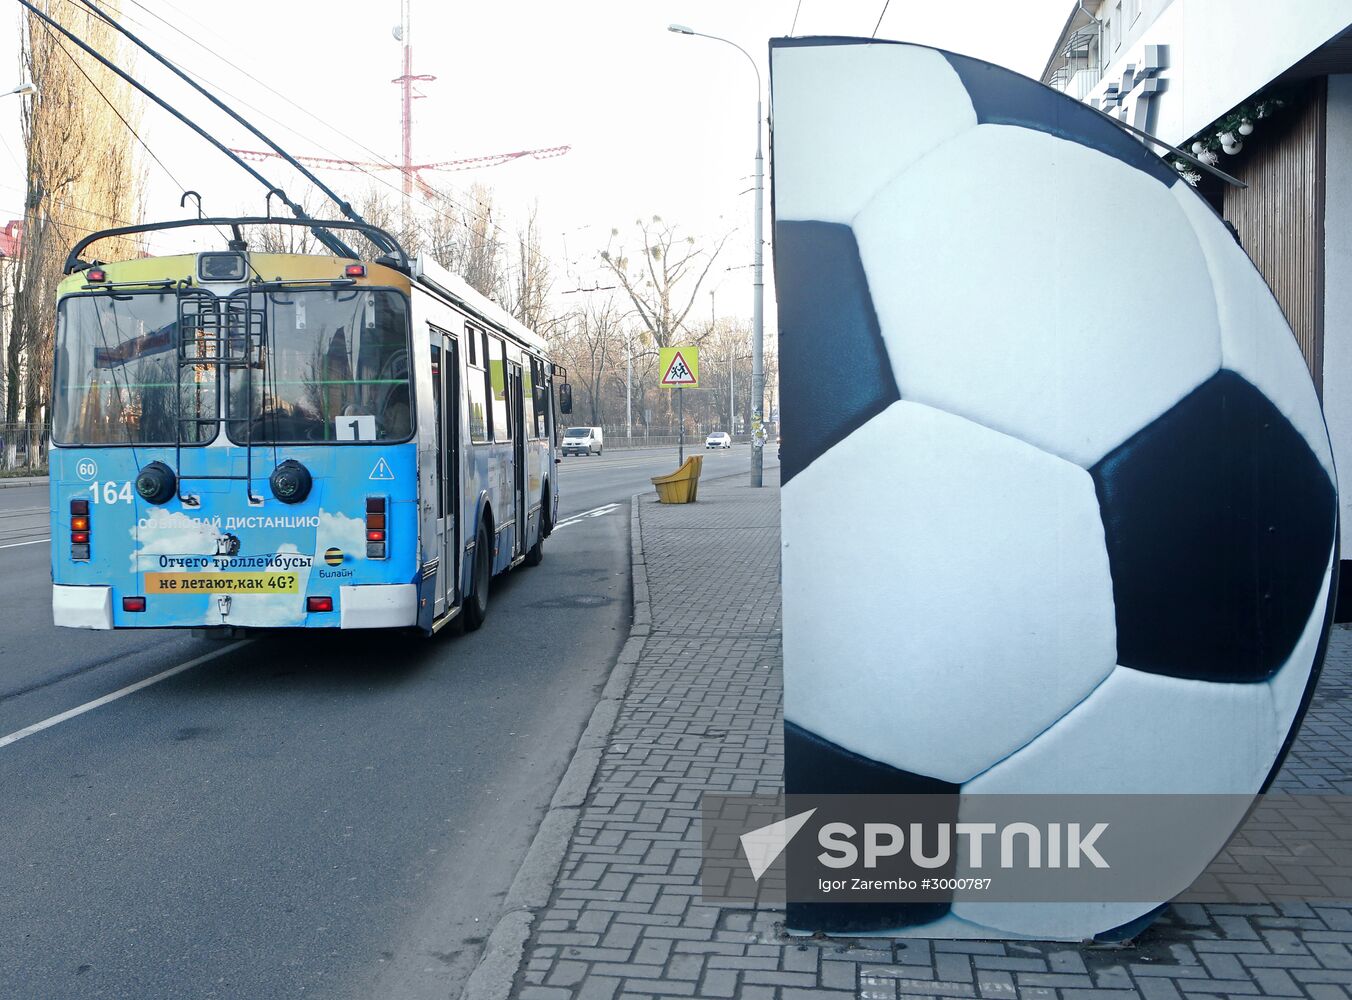 Football-shaped bus stops for 2018 World Cup in Kaliningrad